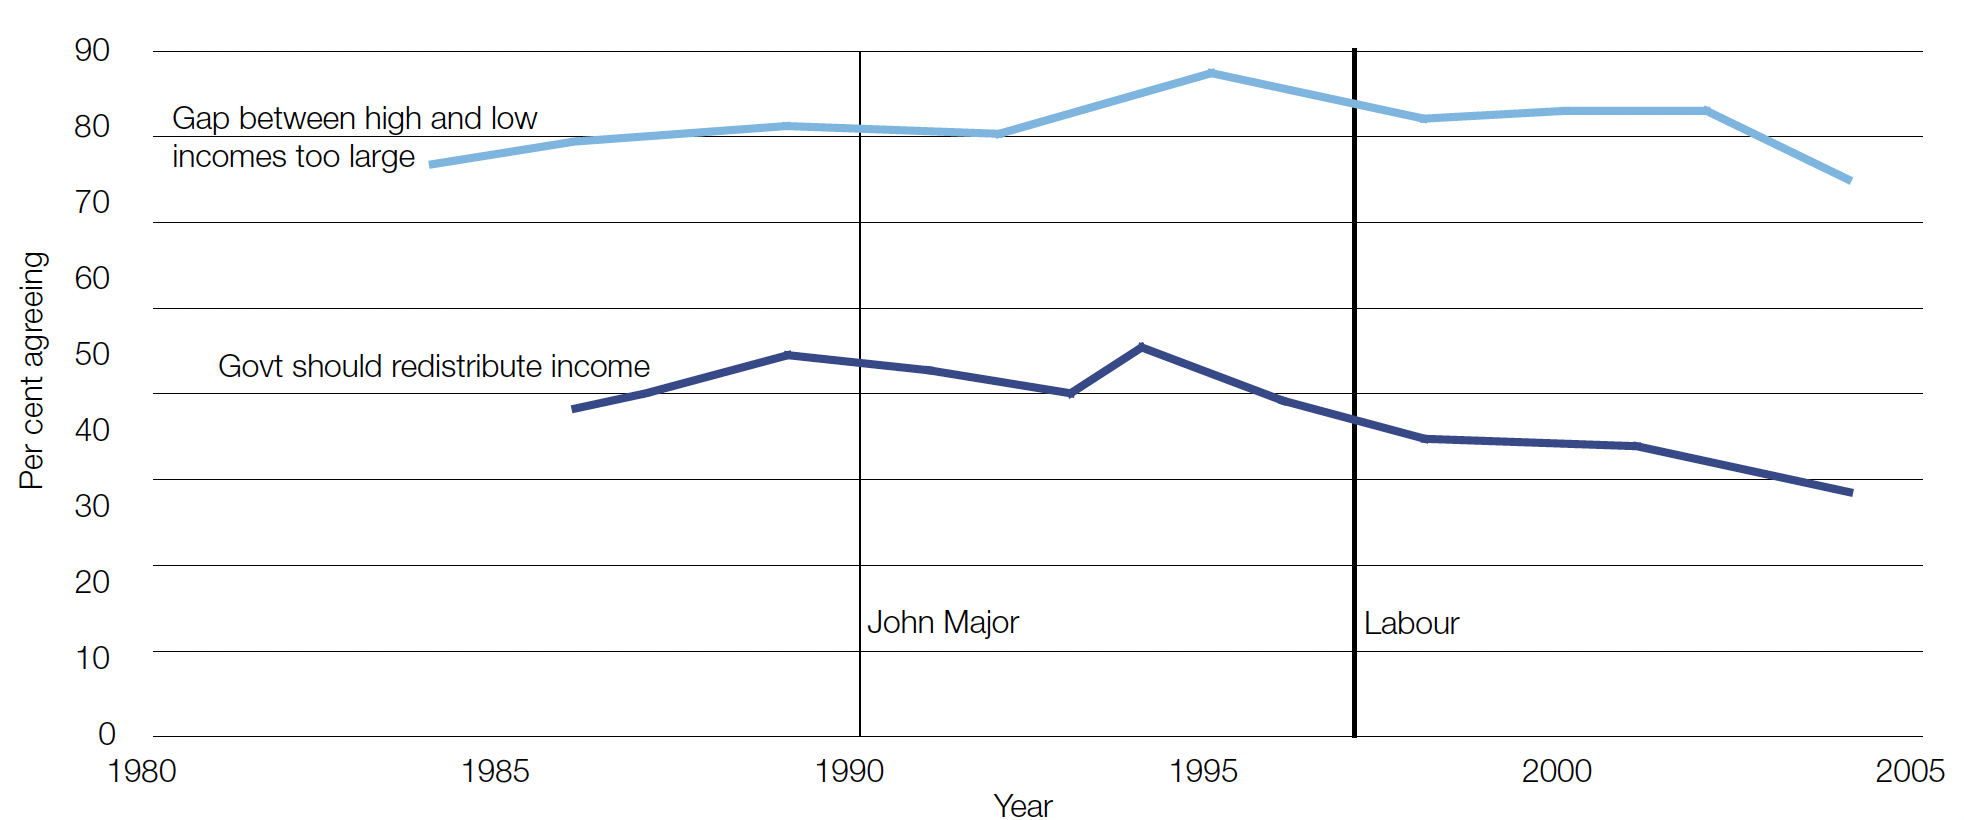 Chart showing views about the income gap and support for redistribution over time.